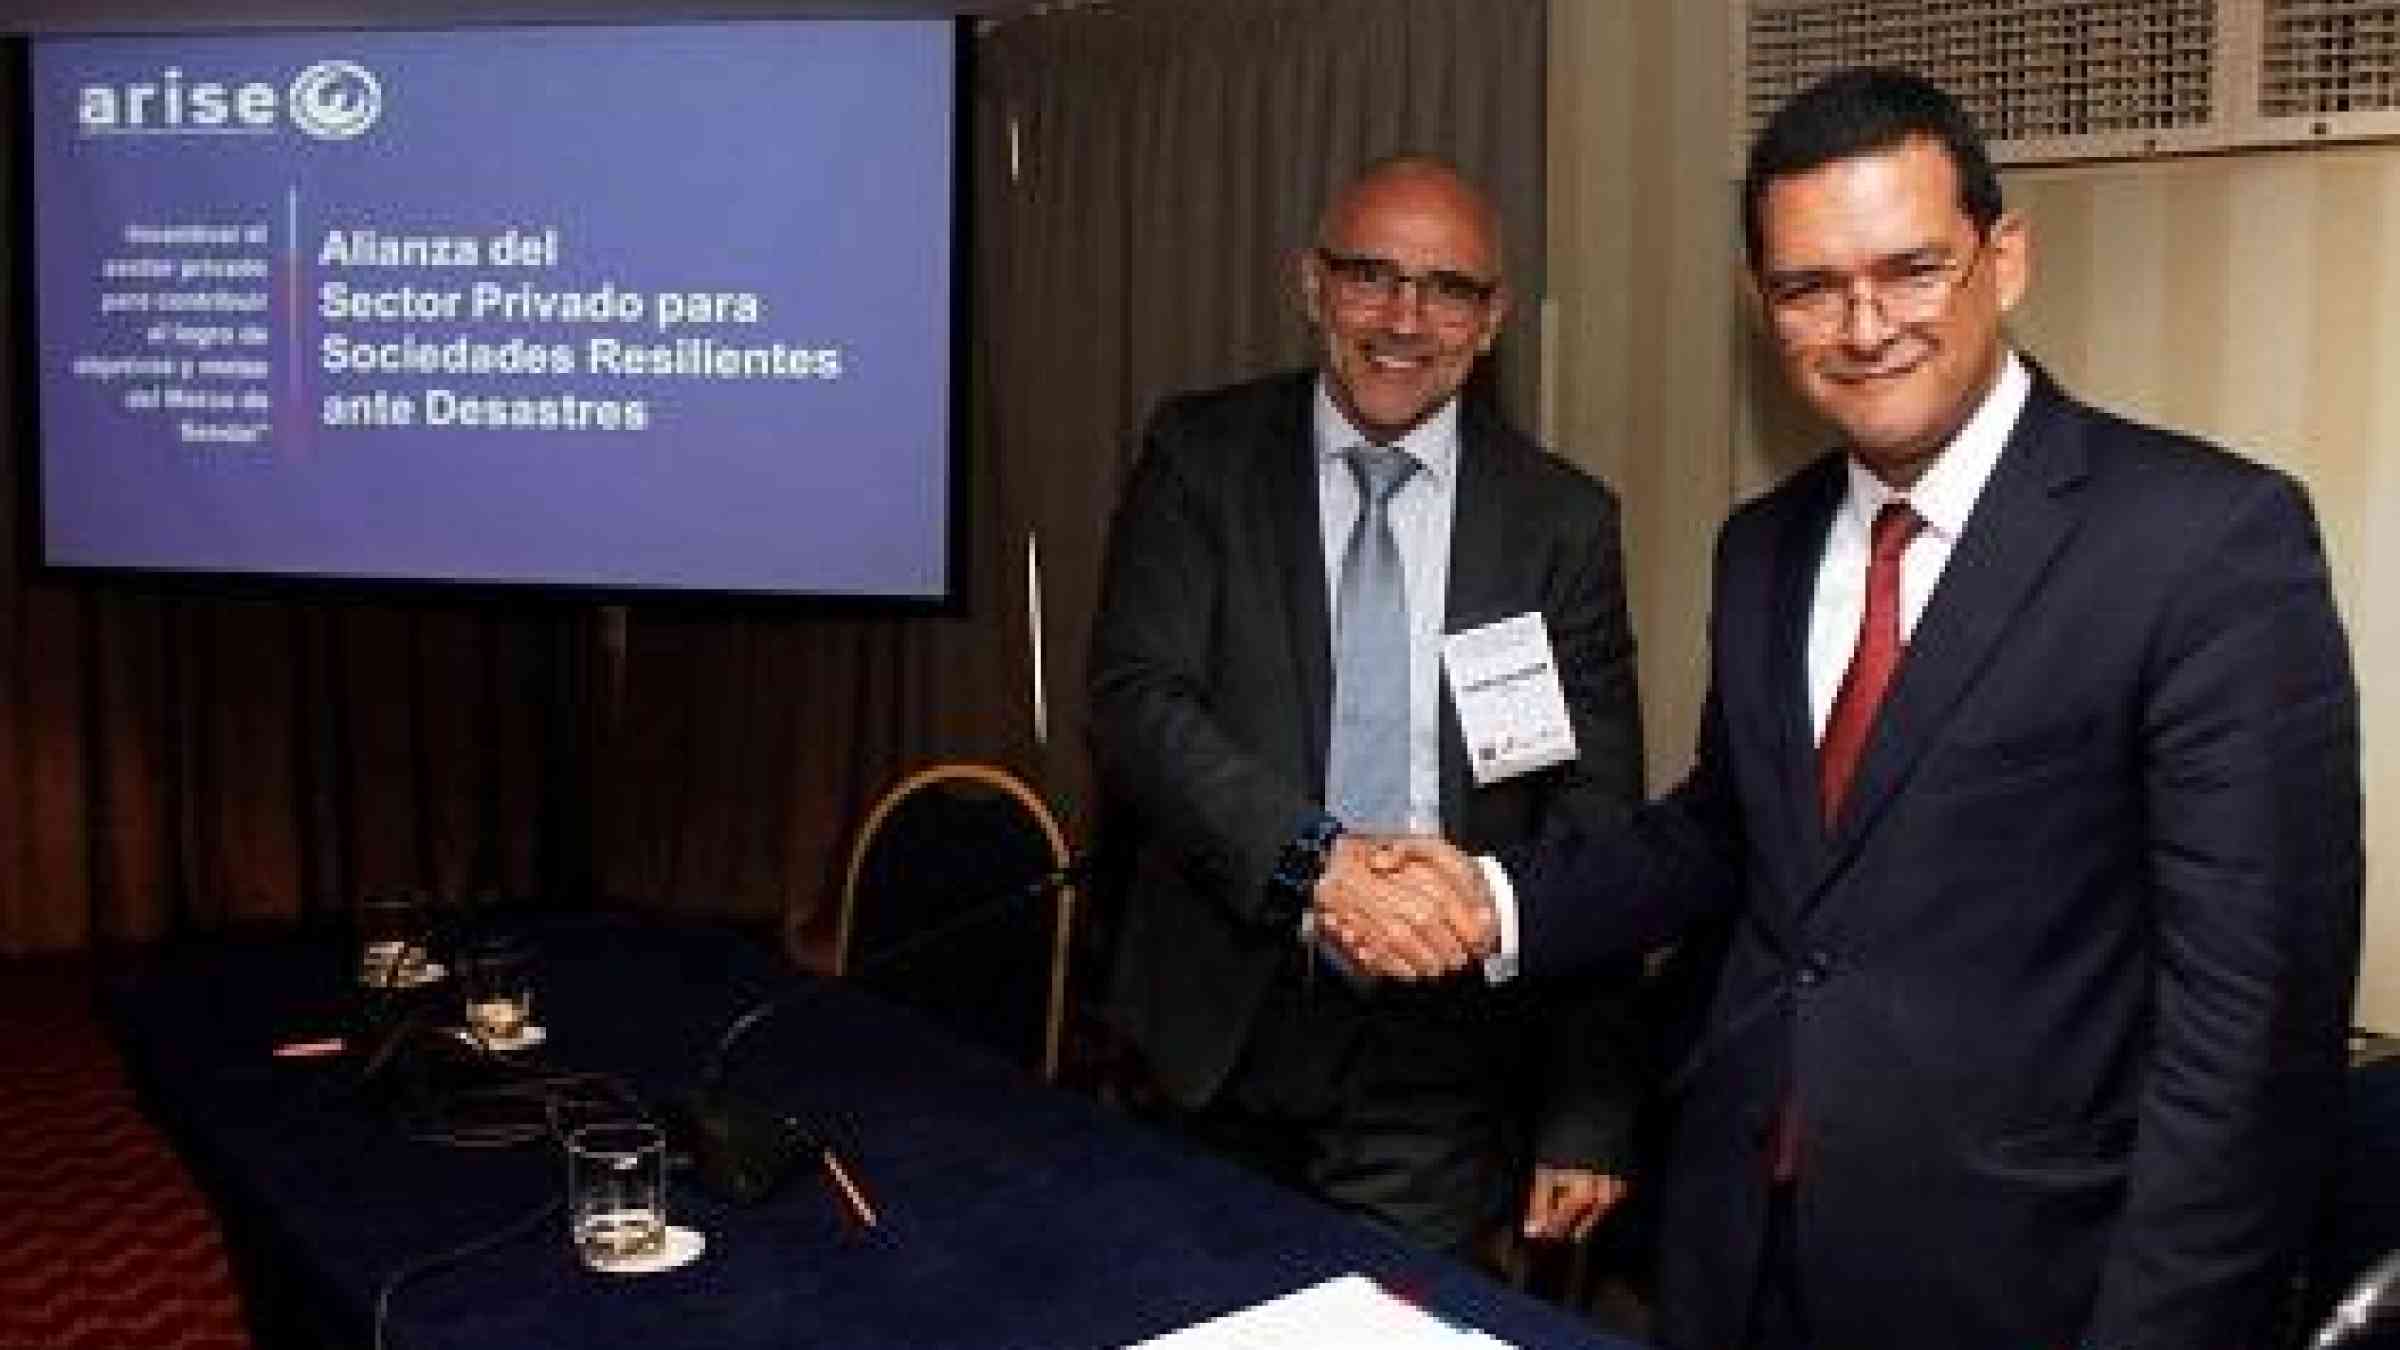 Juan Luis Quer Cumsille (left), Director of SeCRO, General Manager Chile and Raúl Salazar, from the UNISDR Regional Office for the Americas (Photo: ARISE Chile)